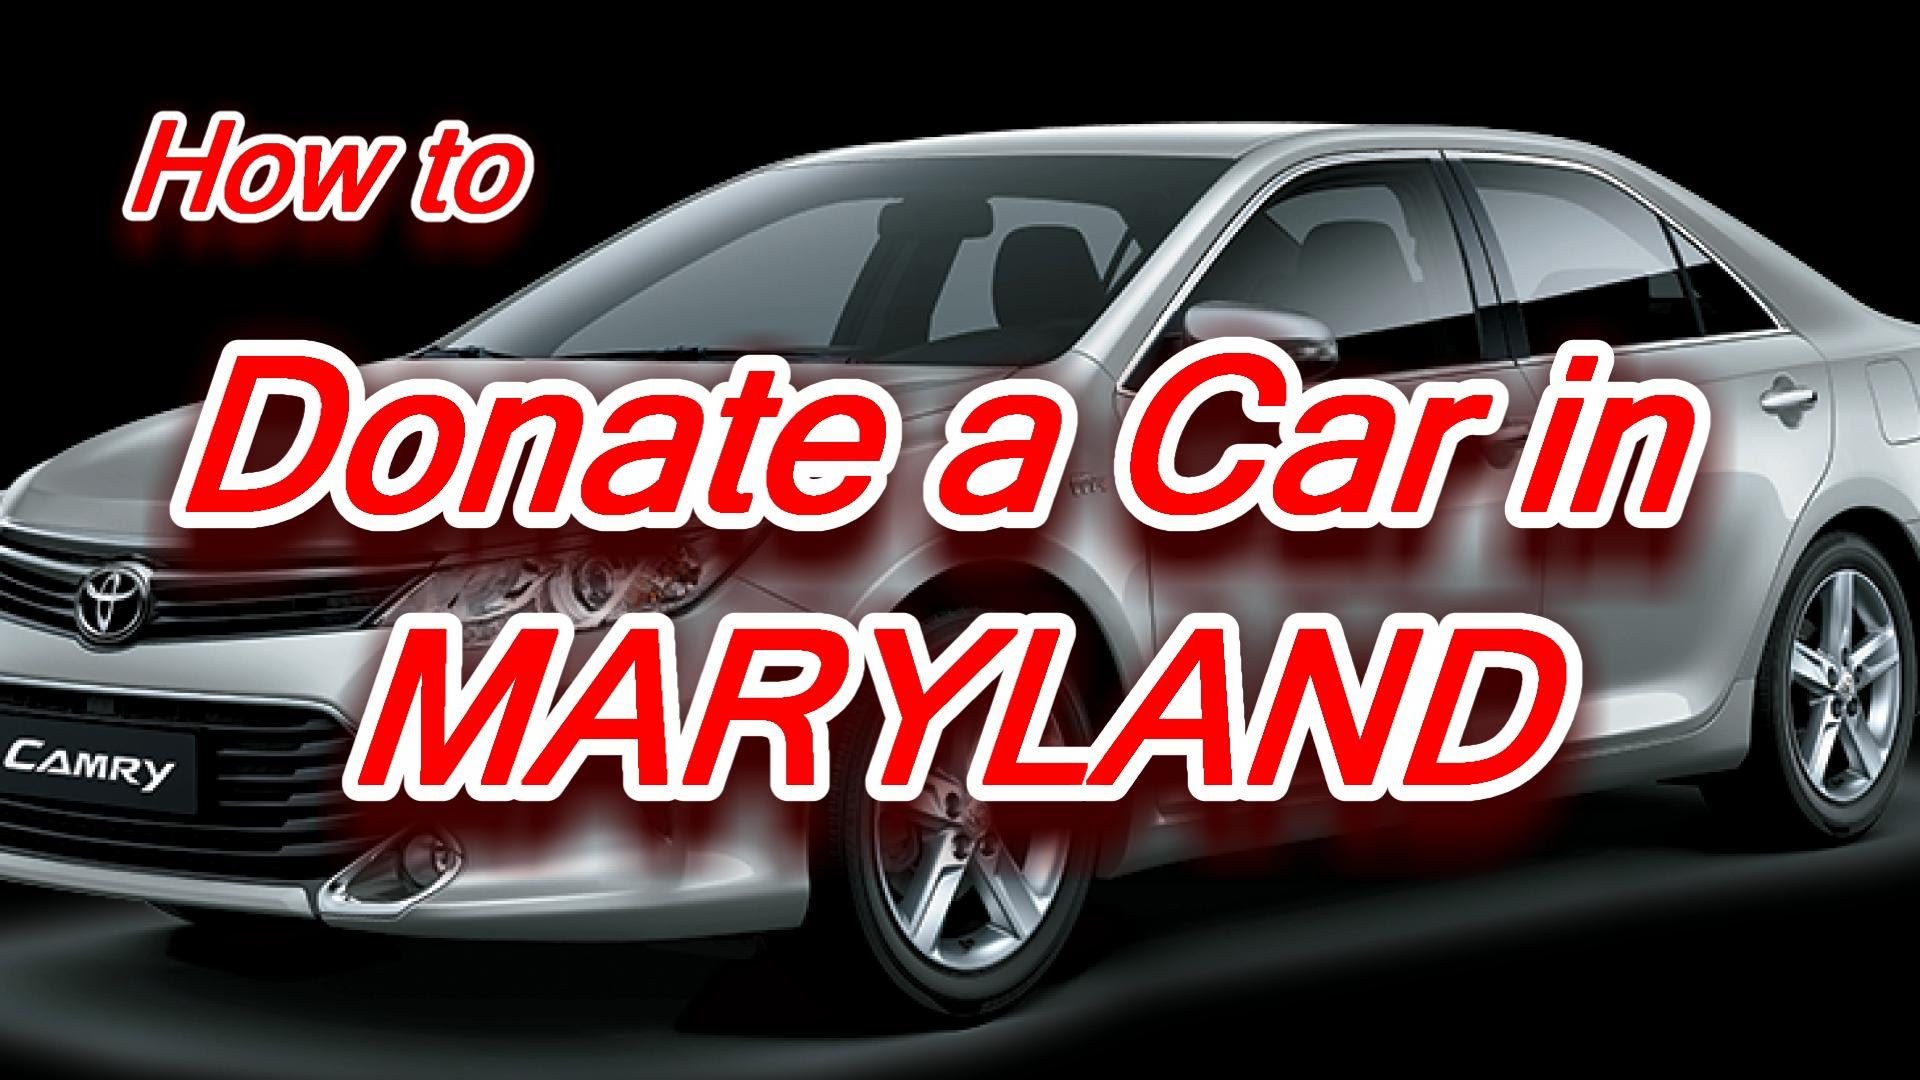 donate-a-car-in-maryland-donate-your-car-to-charity-fanpop